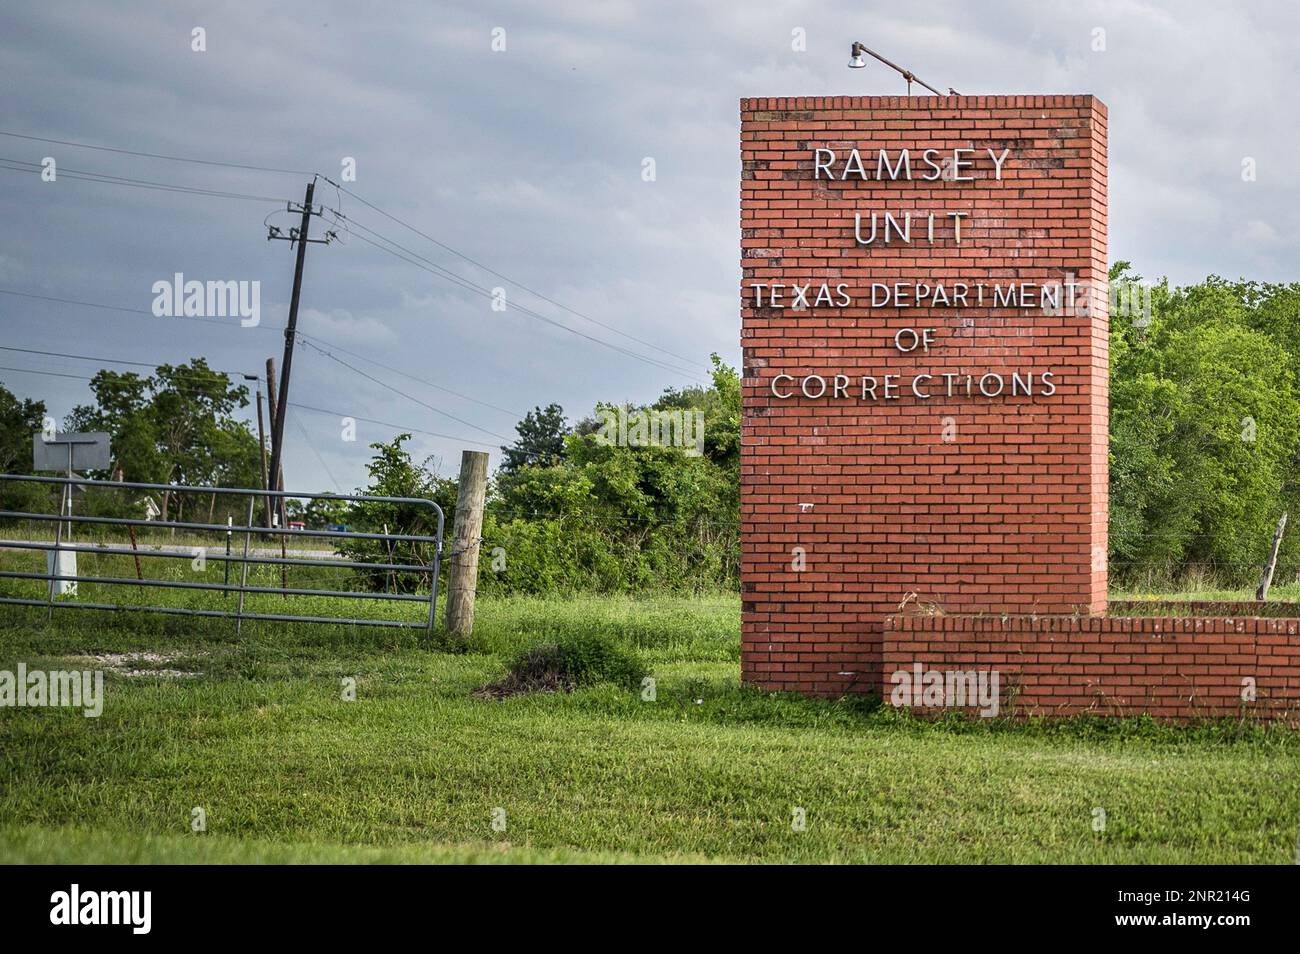 May 8, 2020: The W. F. Ramsey Unit and other Texas Department of Criminal Justice prisons in Brazoria County struggle to manage COVID-19 novel coronavirus infections. Prentice C. James/CSM(Credit Image: © Prentice C. James/CSM via ZUMA Wire) (Cal Sport Media via AP Images) Stock Photo